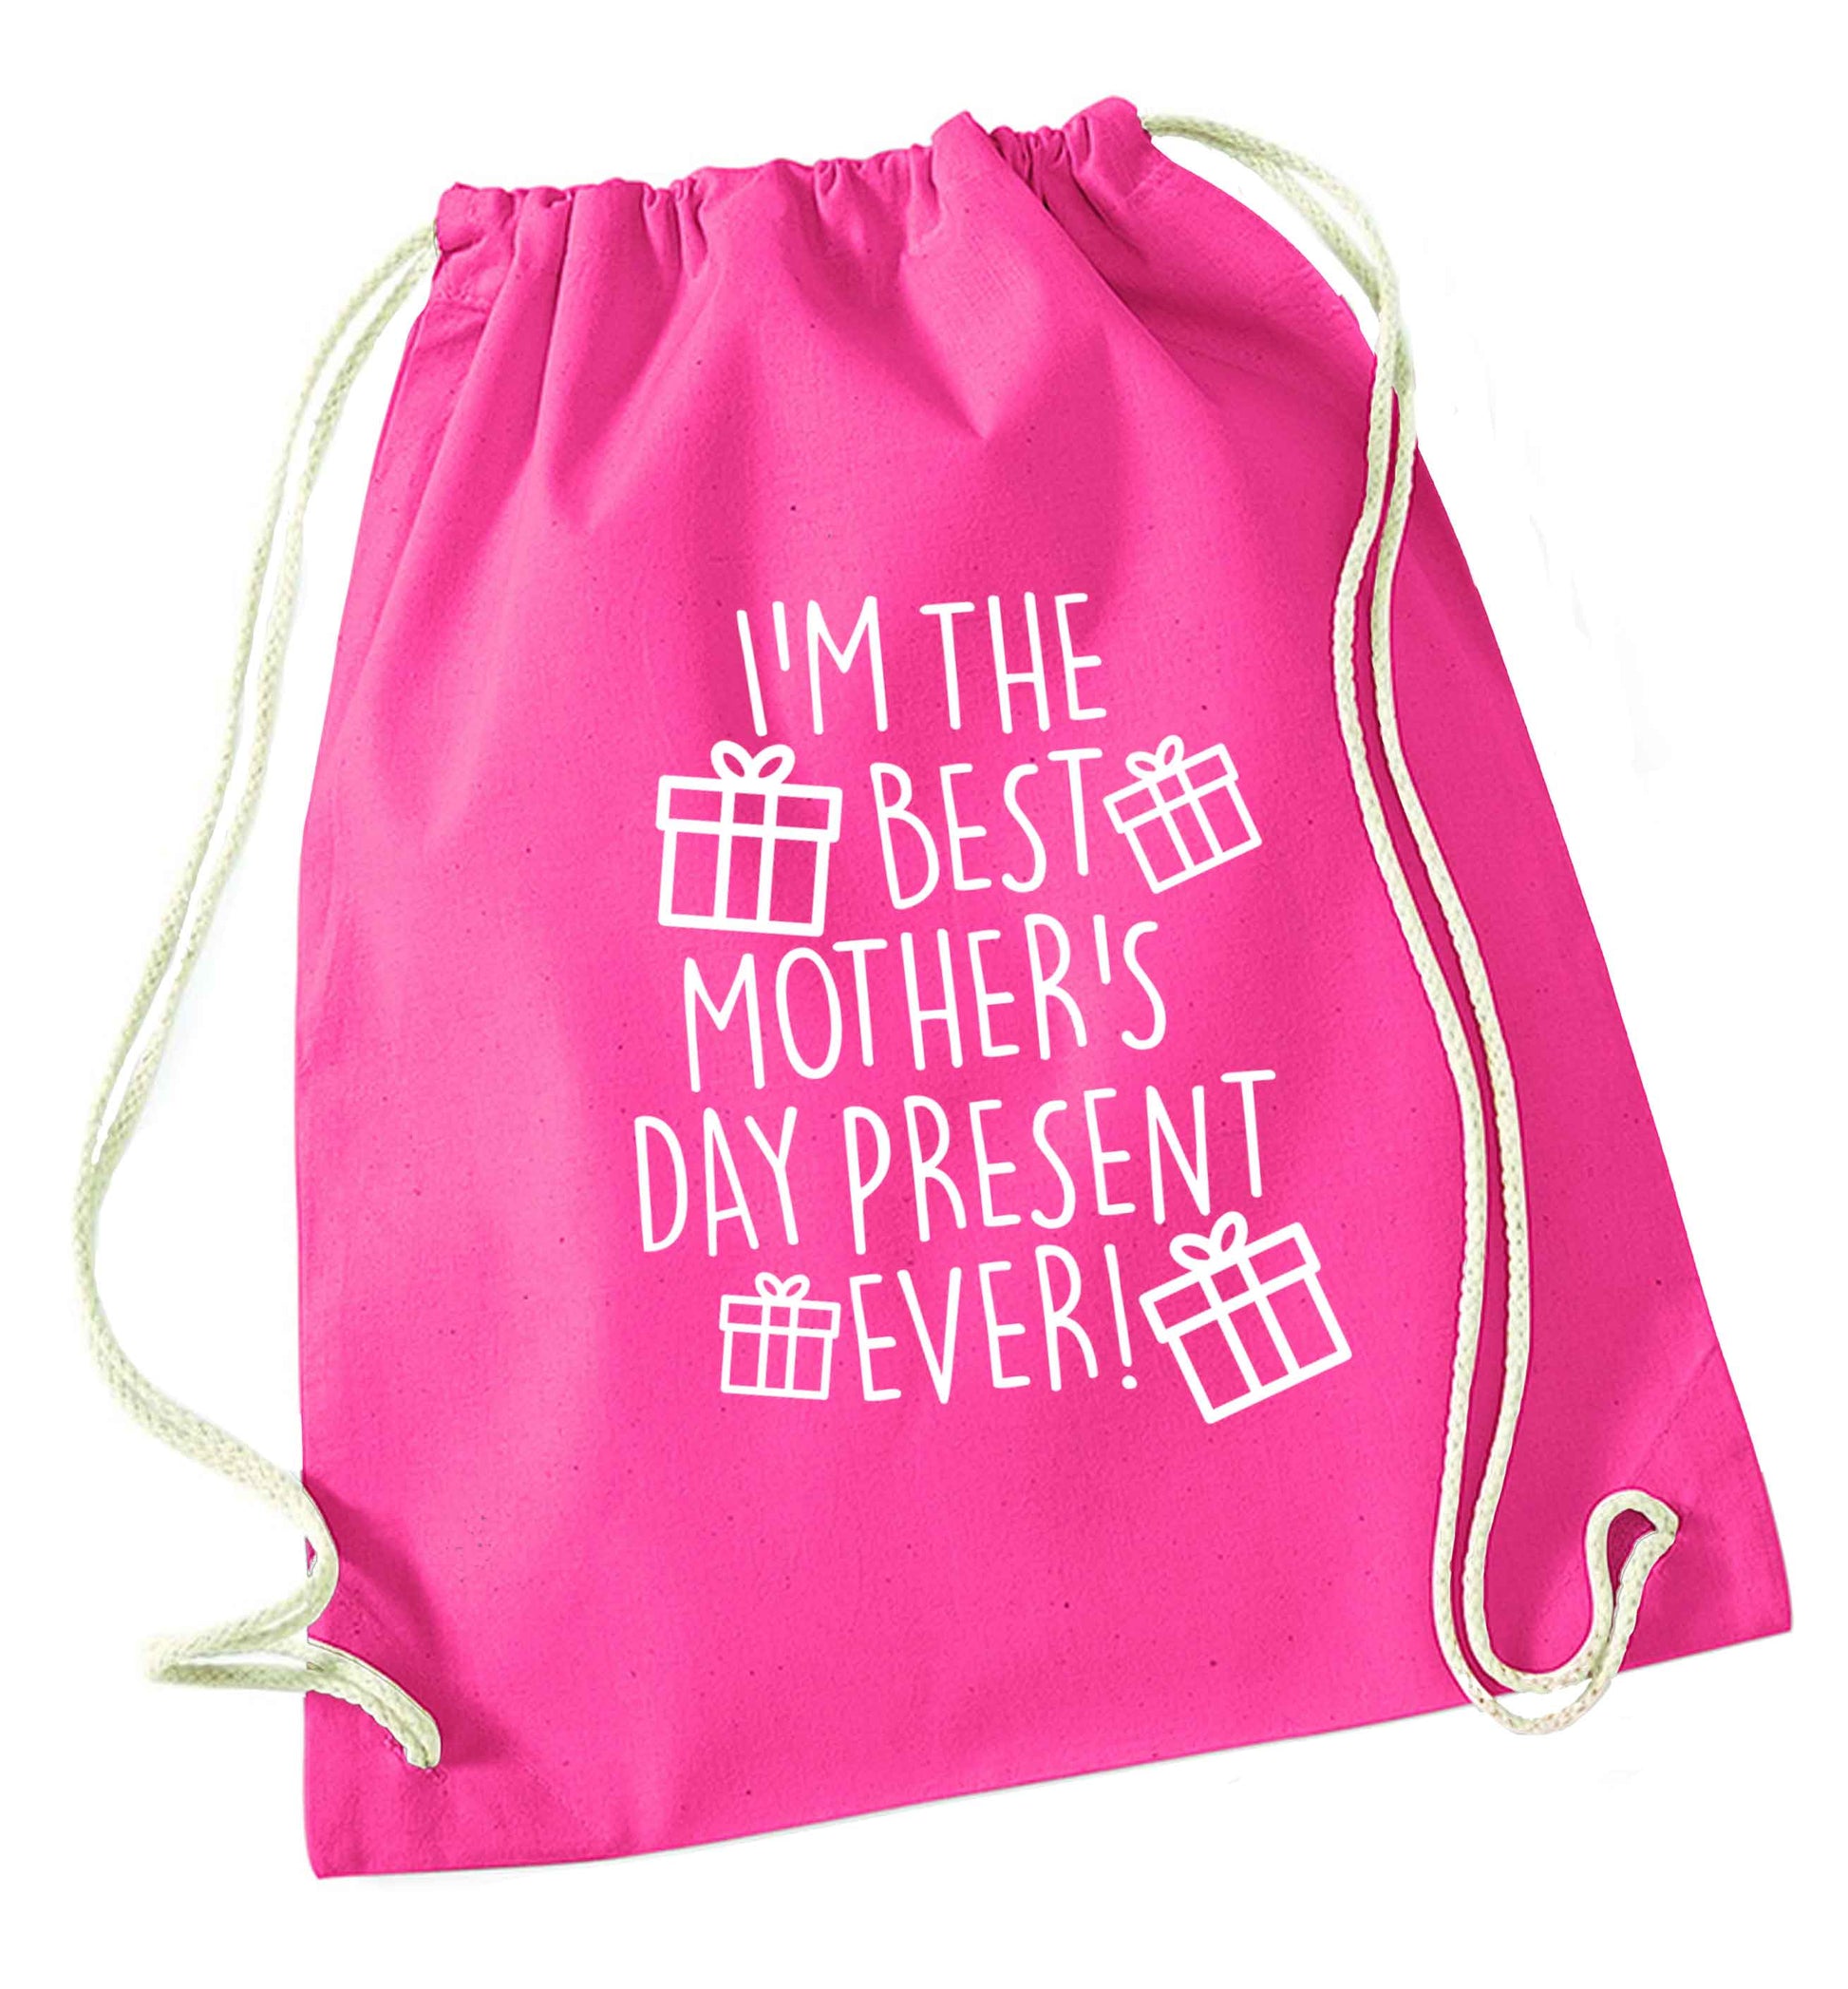 I'm the best mother's day present ever! pink drawstring bag